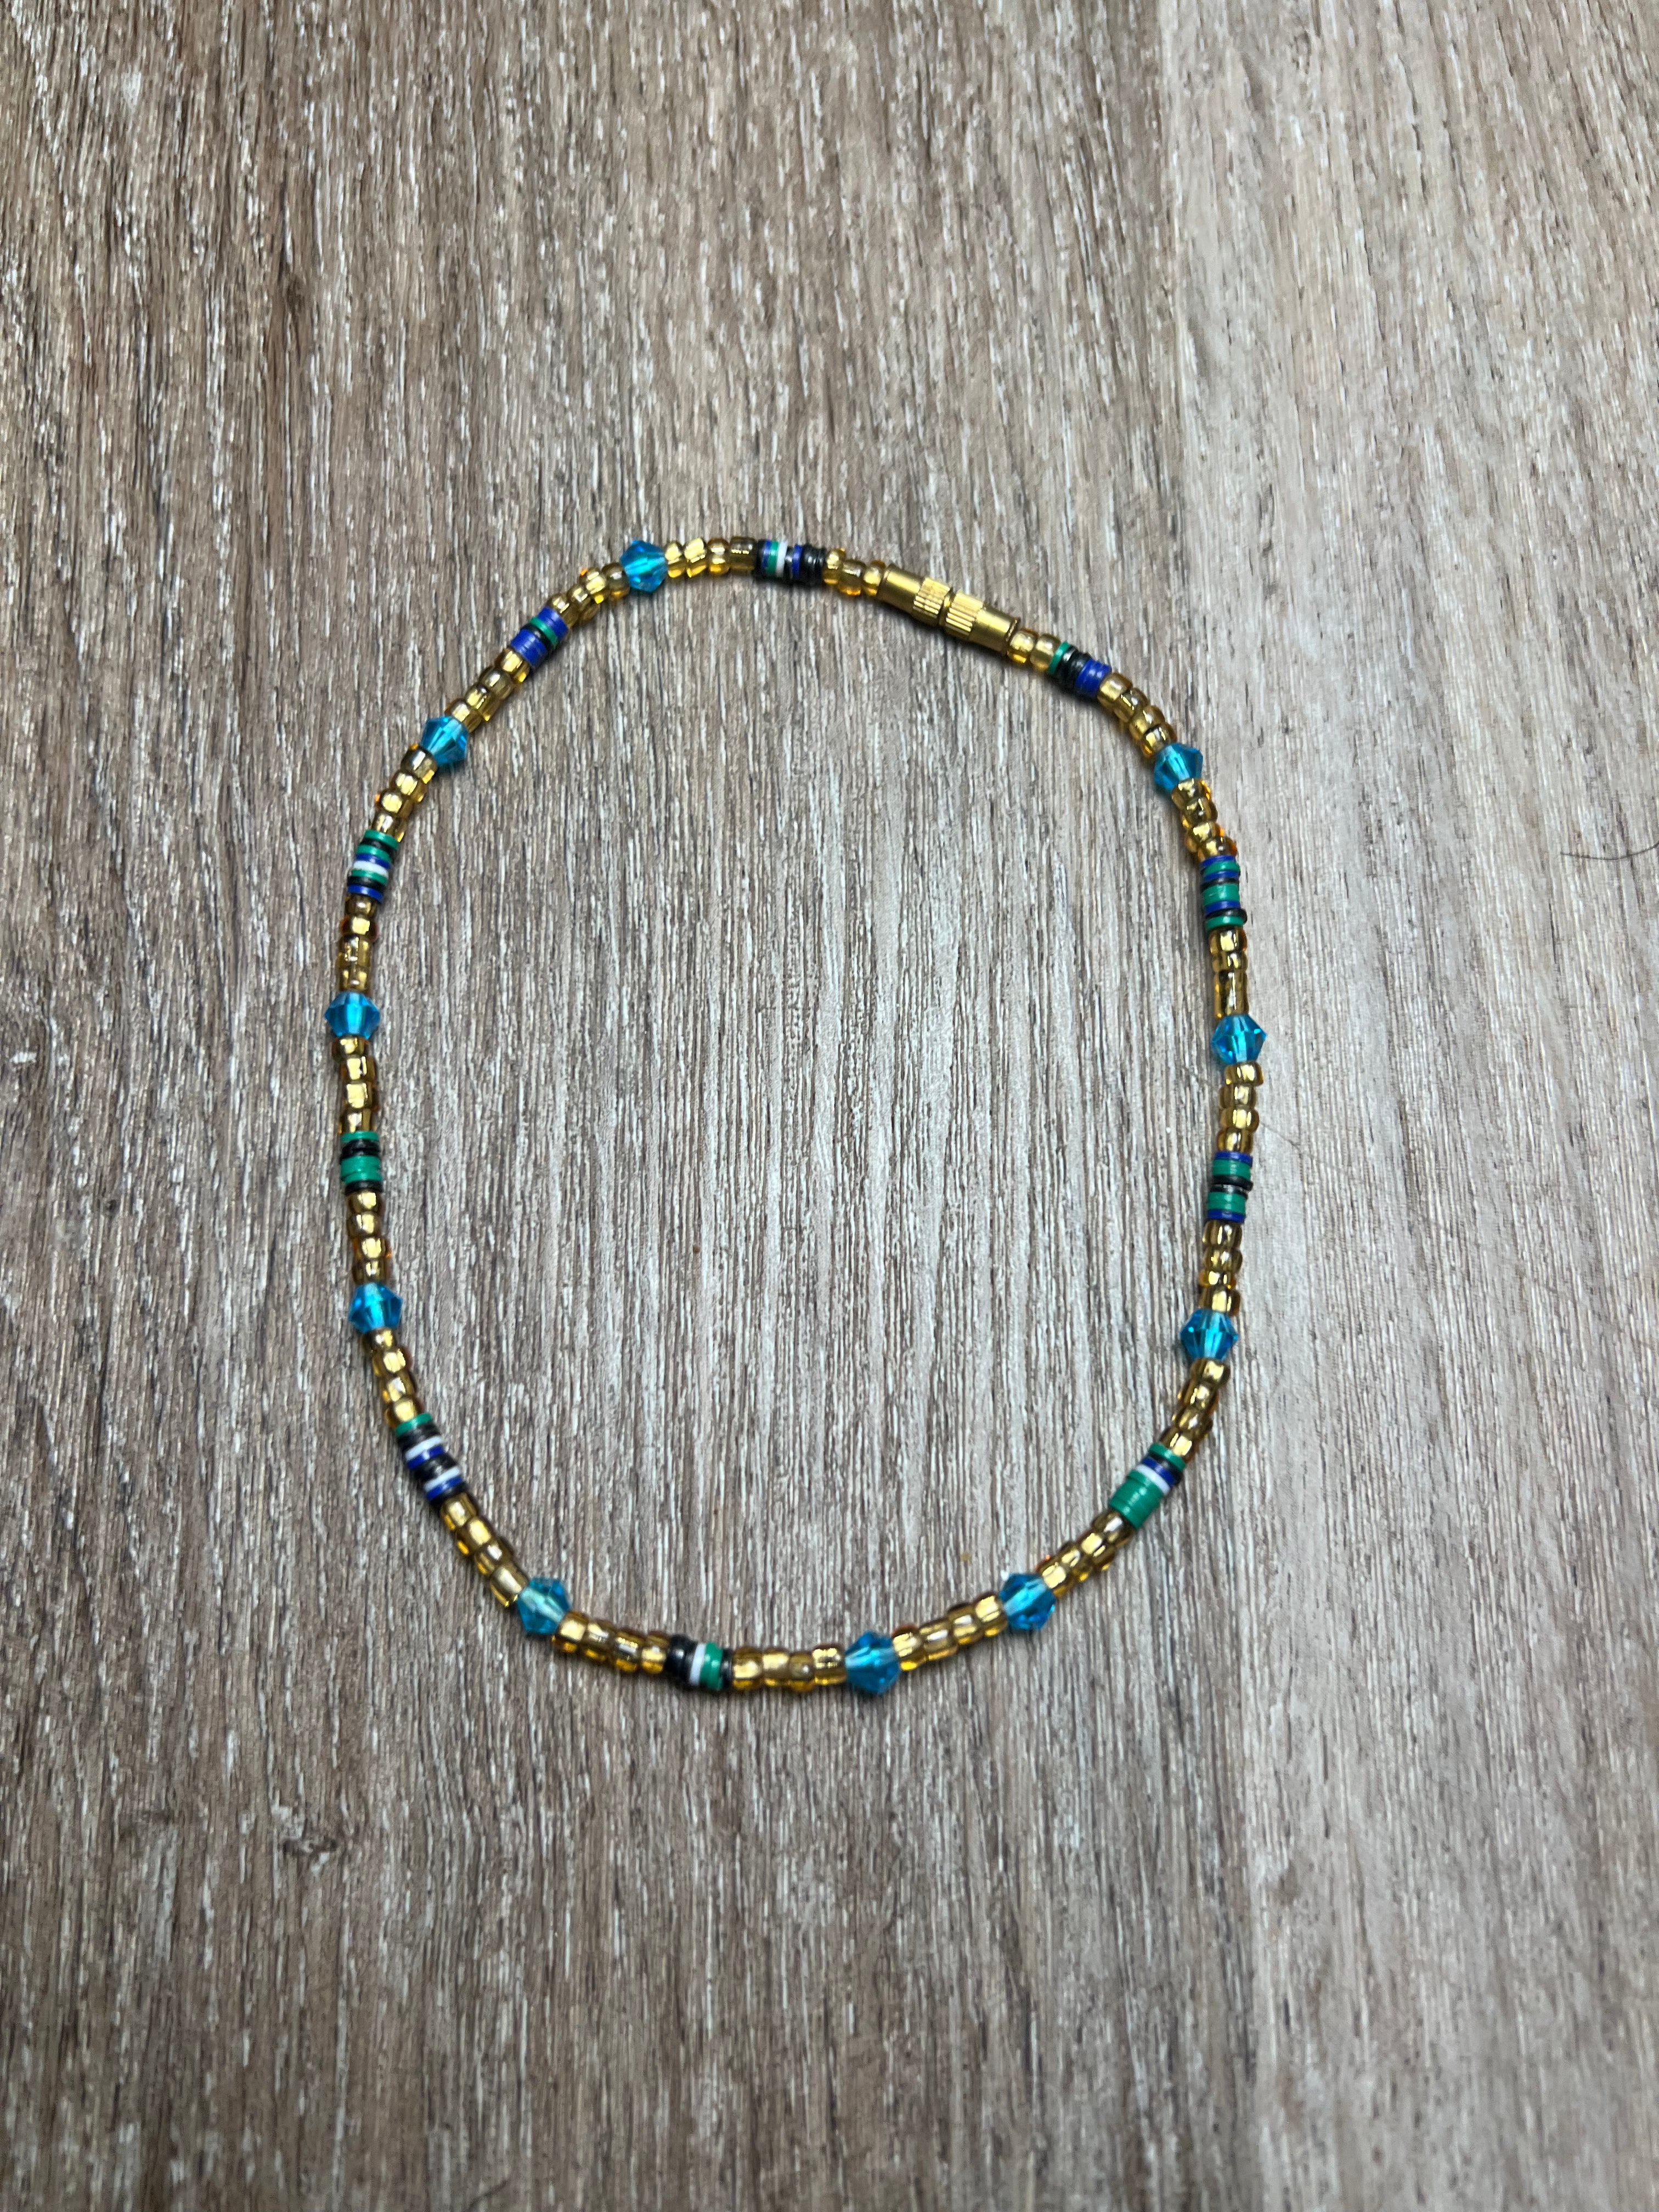 African Beaded Anklet (Tiwa)